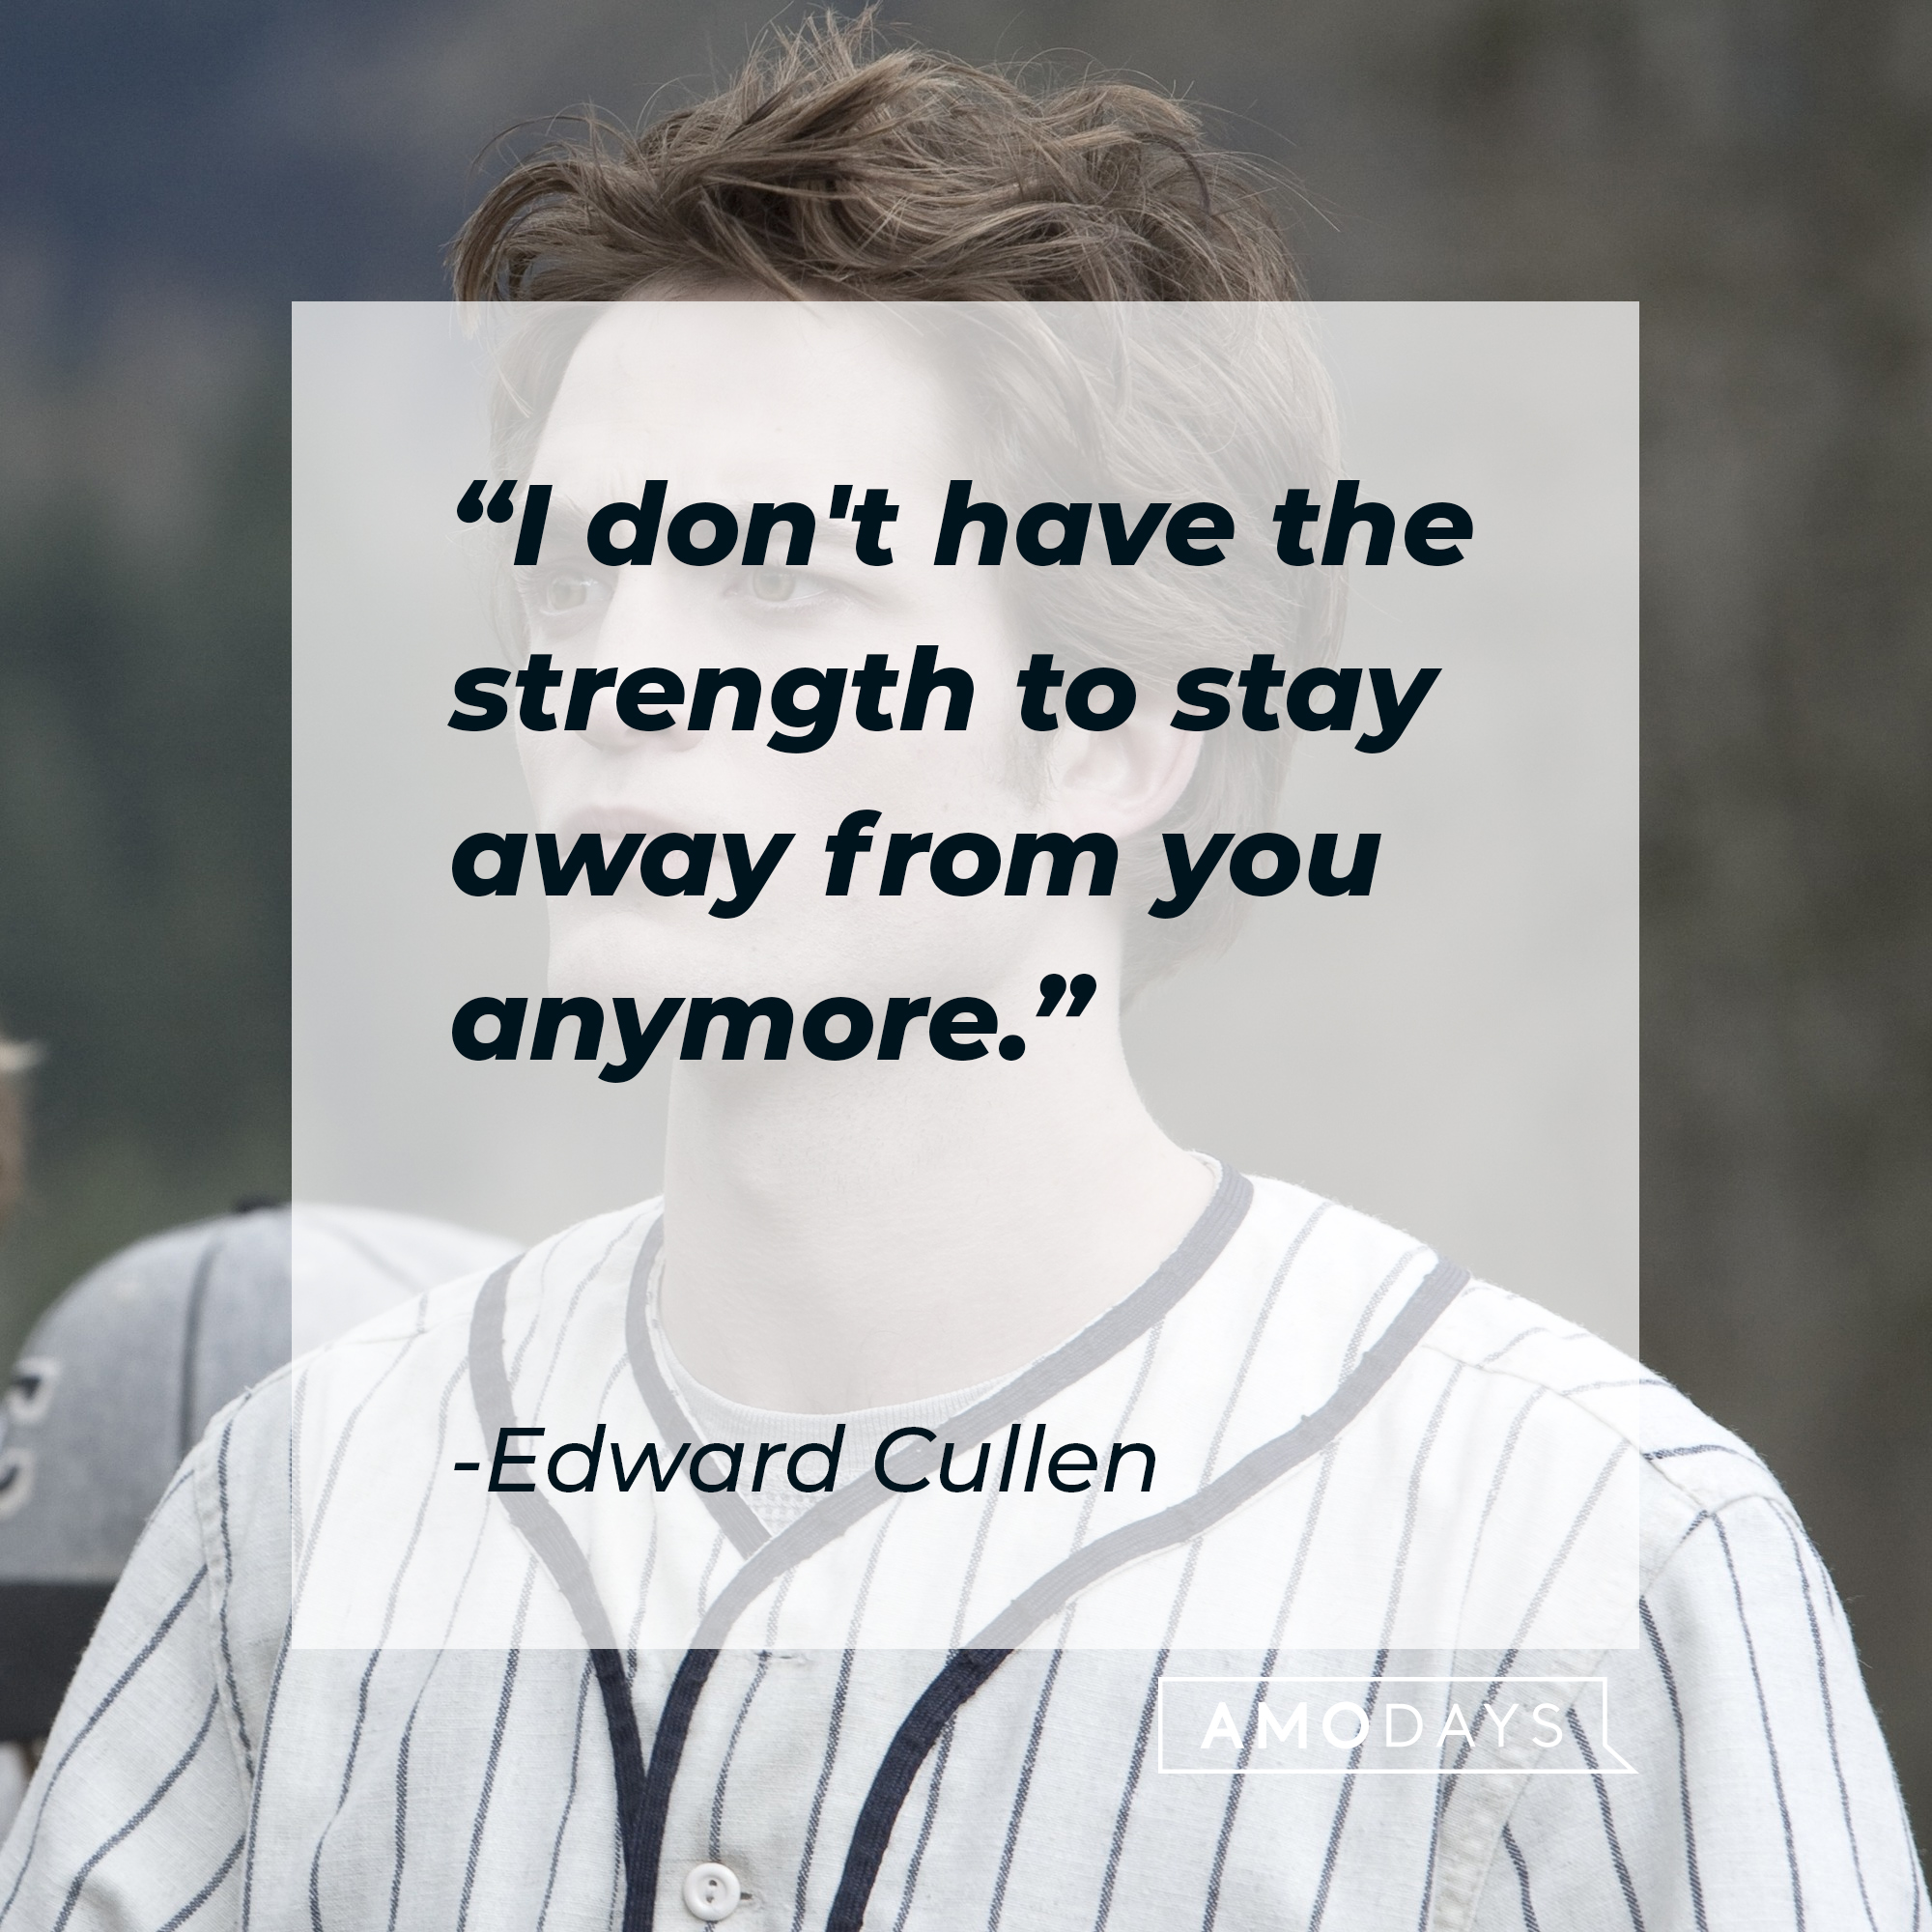 An image of Edward Cullen with his quote: “I don't have the strength to stay away from you anymore.” | Source: Facebook.com/twilight